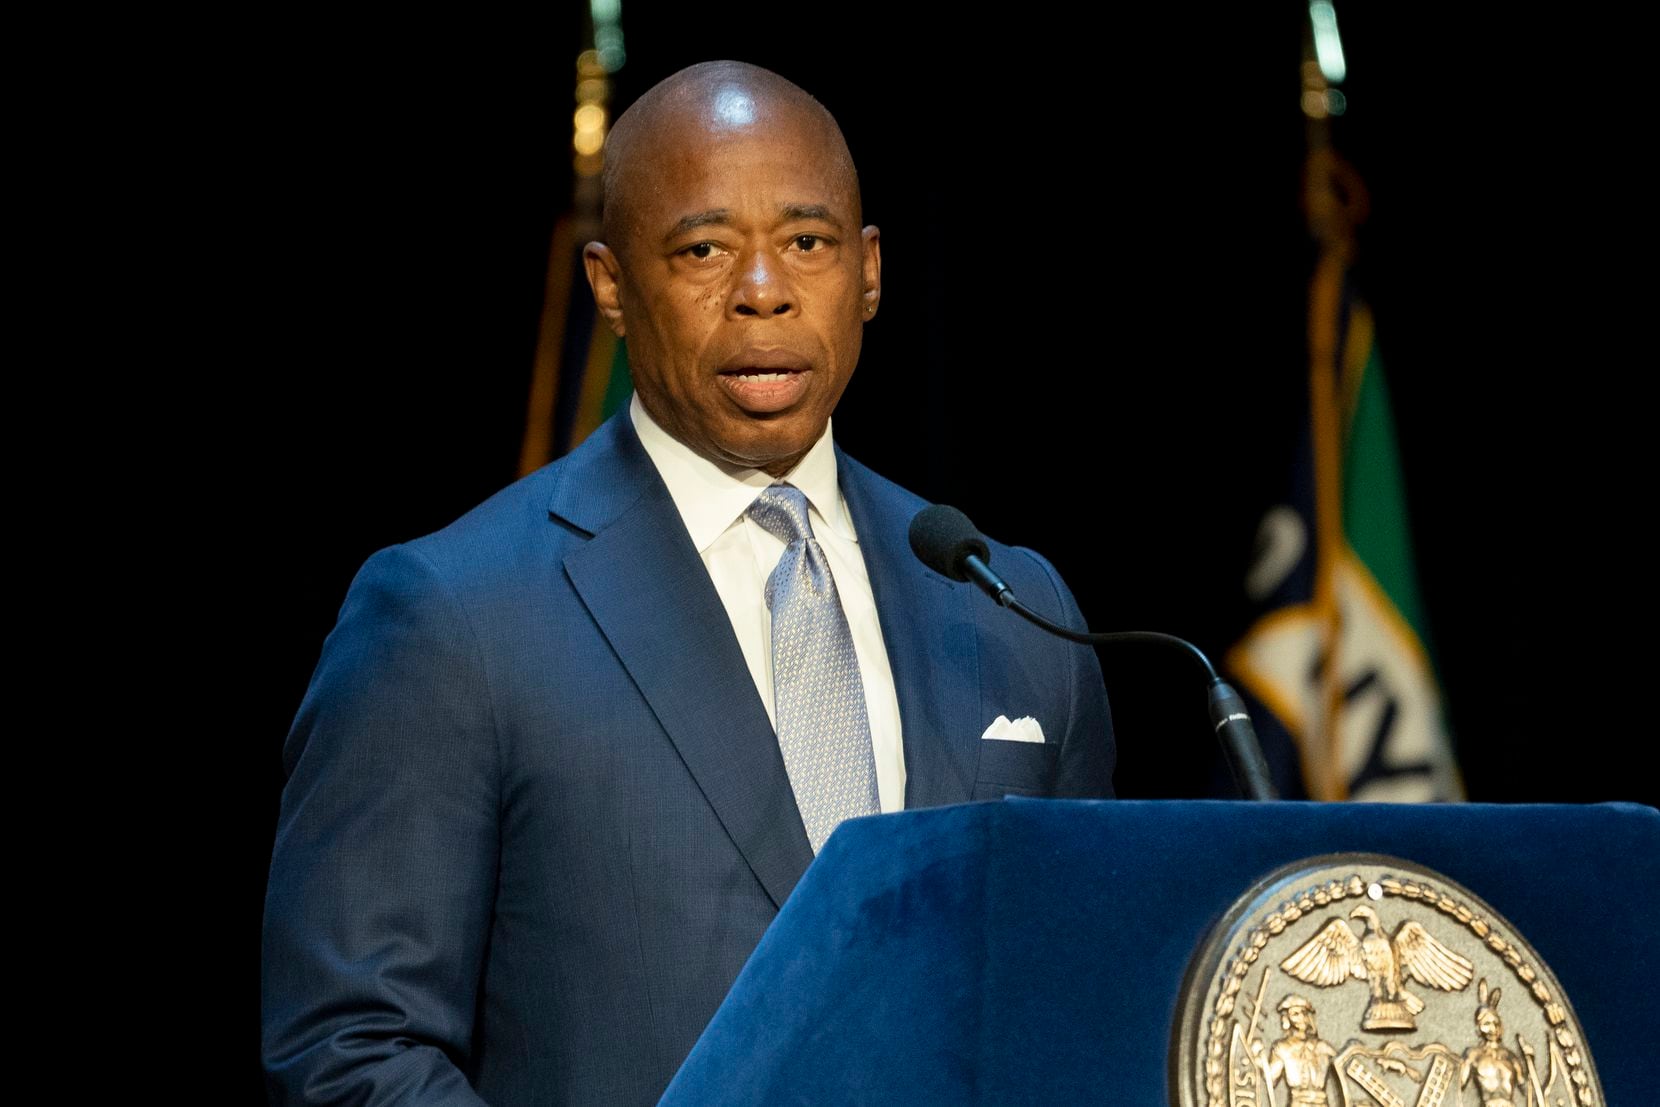 Mayor Eric Adams spoke during a graduation ceremony at Madison Square Garden in New York on...